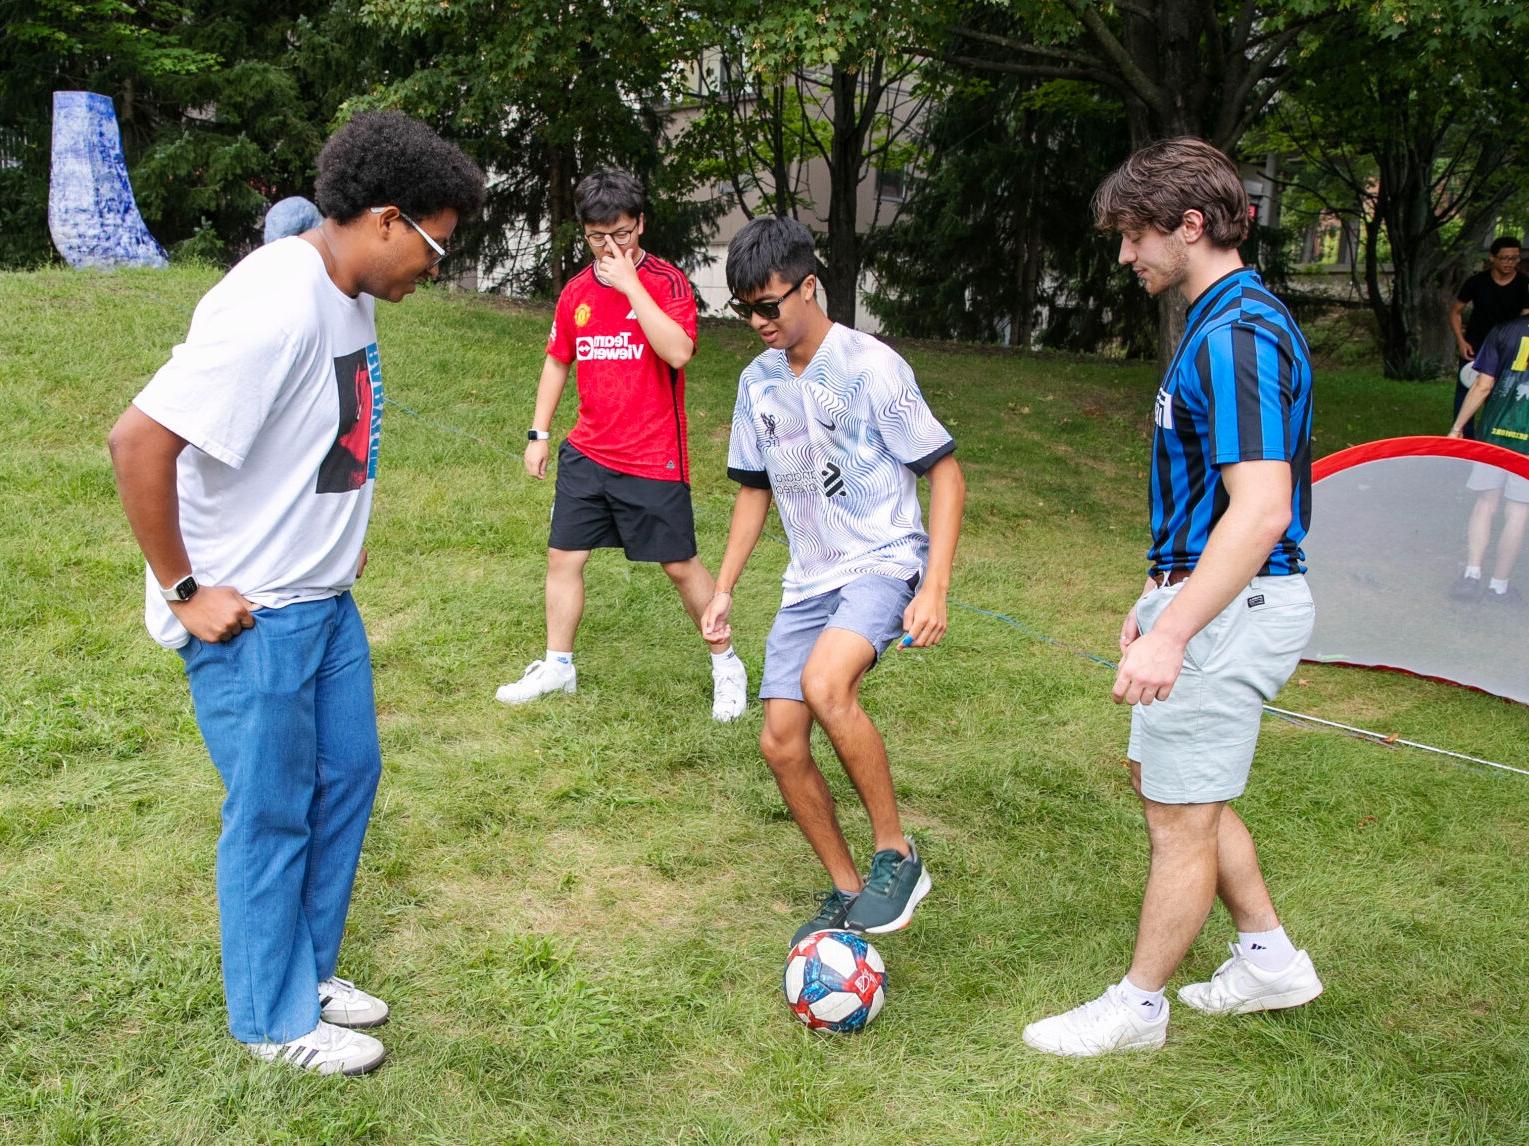 Four students play soccer on Skidmore's South Lawn.